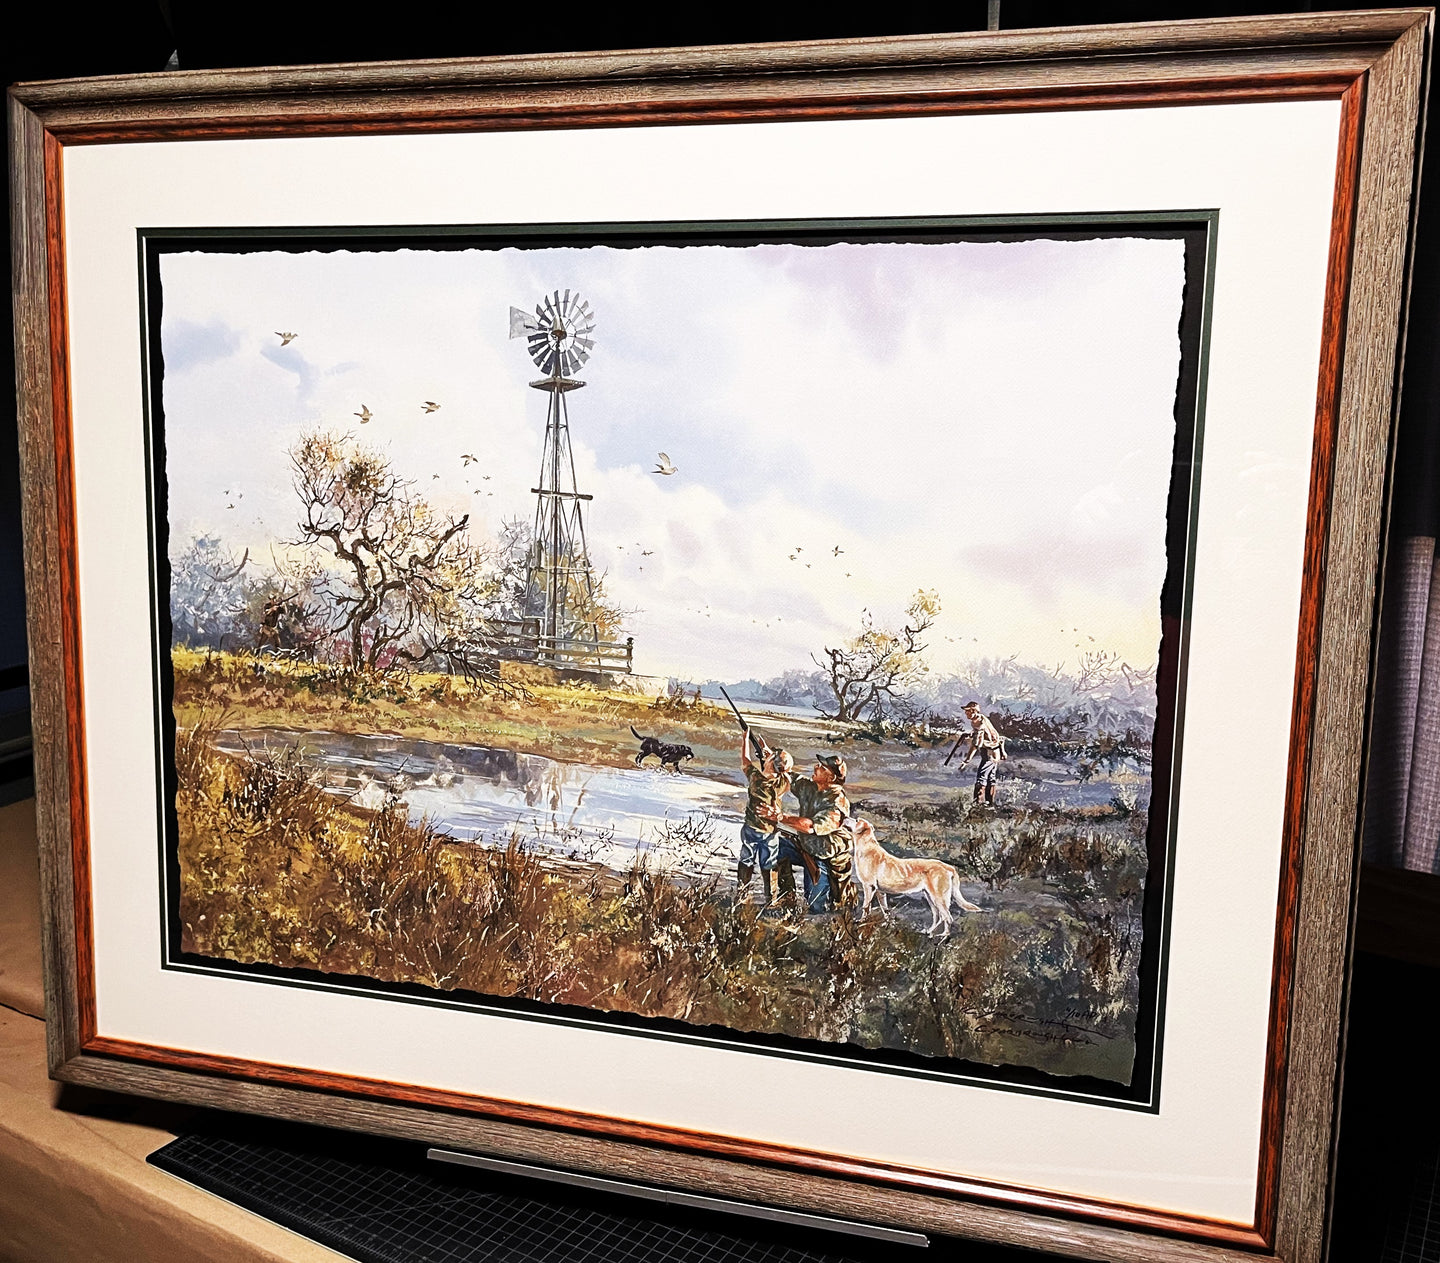 Chance Yarbrough - Mourning Dove Memories - Artist Proof Edition - Full Sheet GiClee - Brand New Custom Sporting Frame